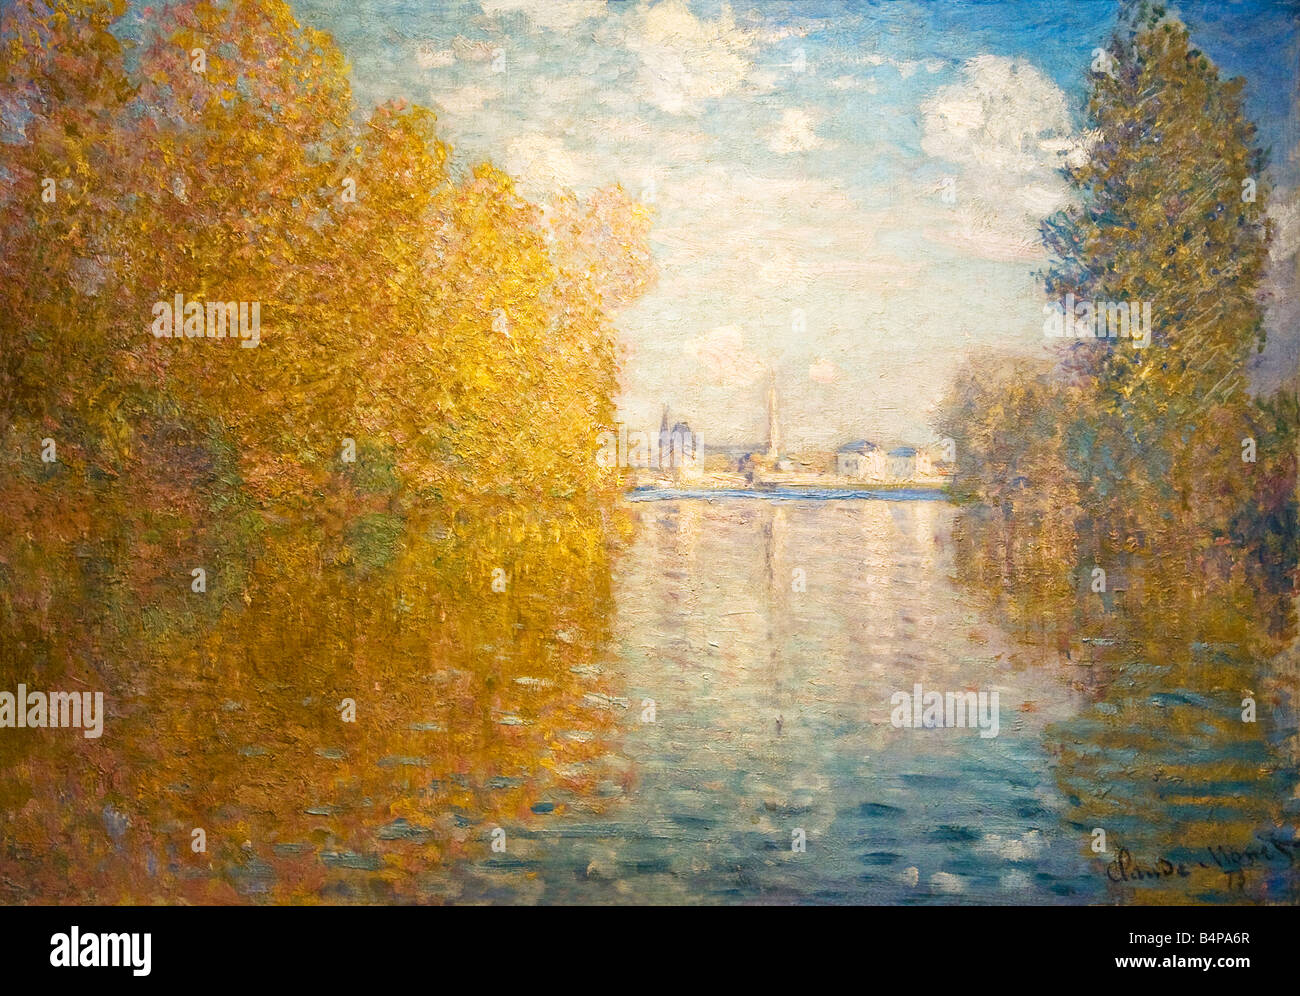 Autumn Effect at Argenteuil Claude Monet oil on canvas 1873 Courtauld Gallery interior Somerset House London England Stock Photo